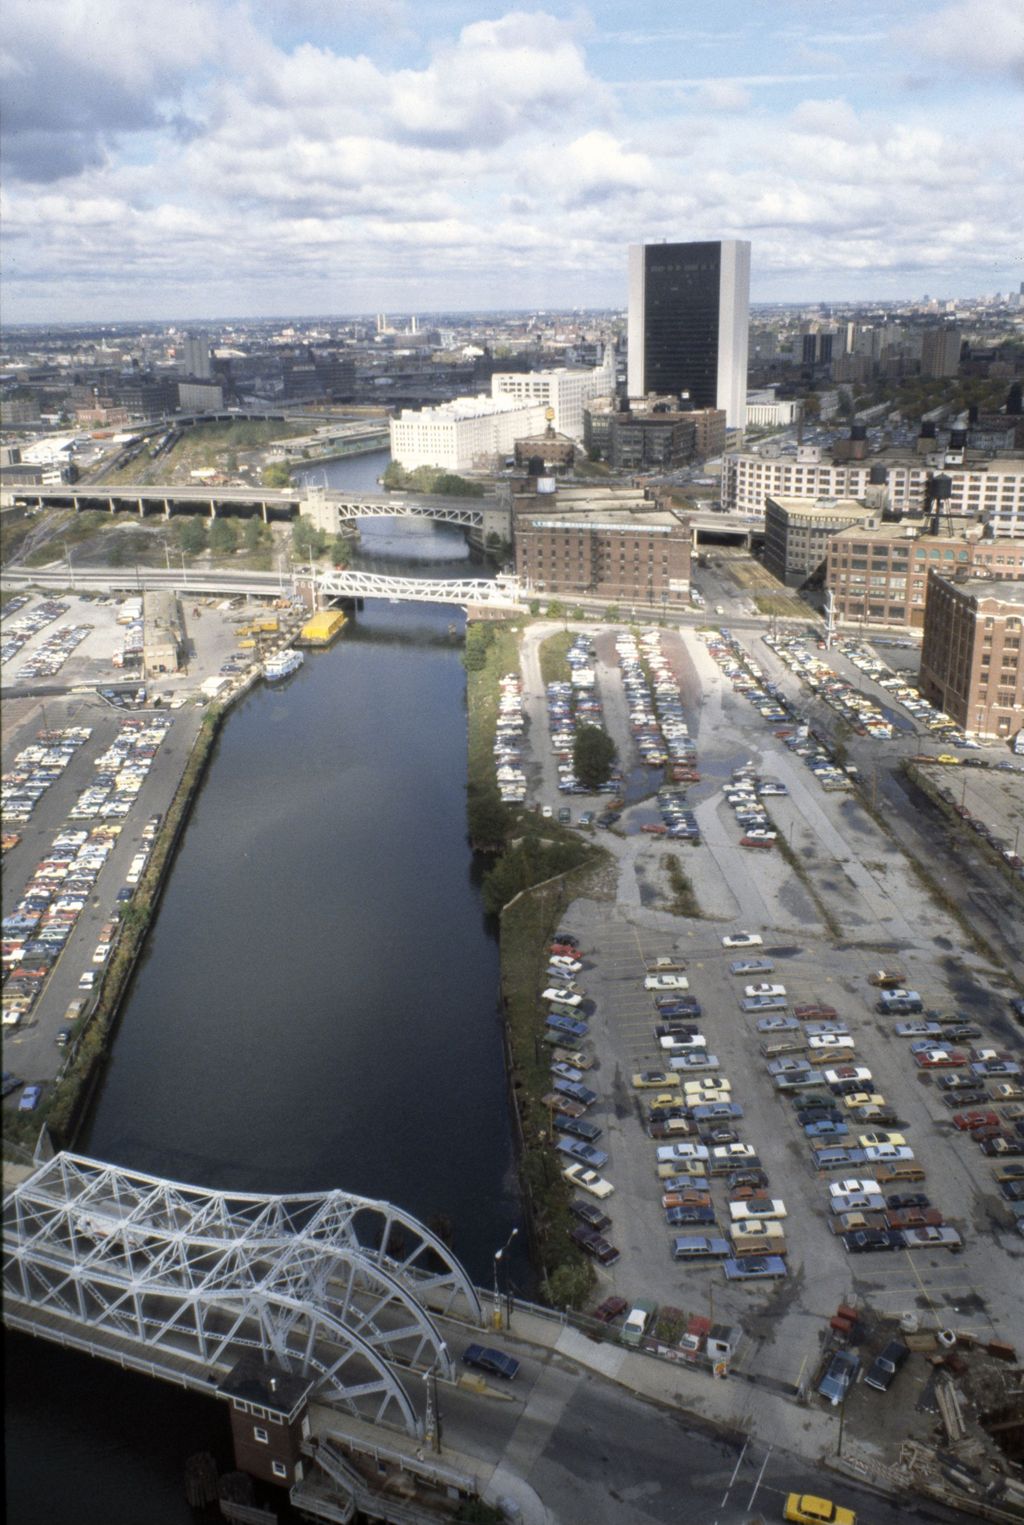 Industrial areas along the North Branch of the Chicago River